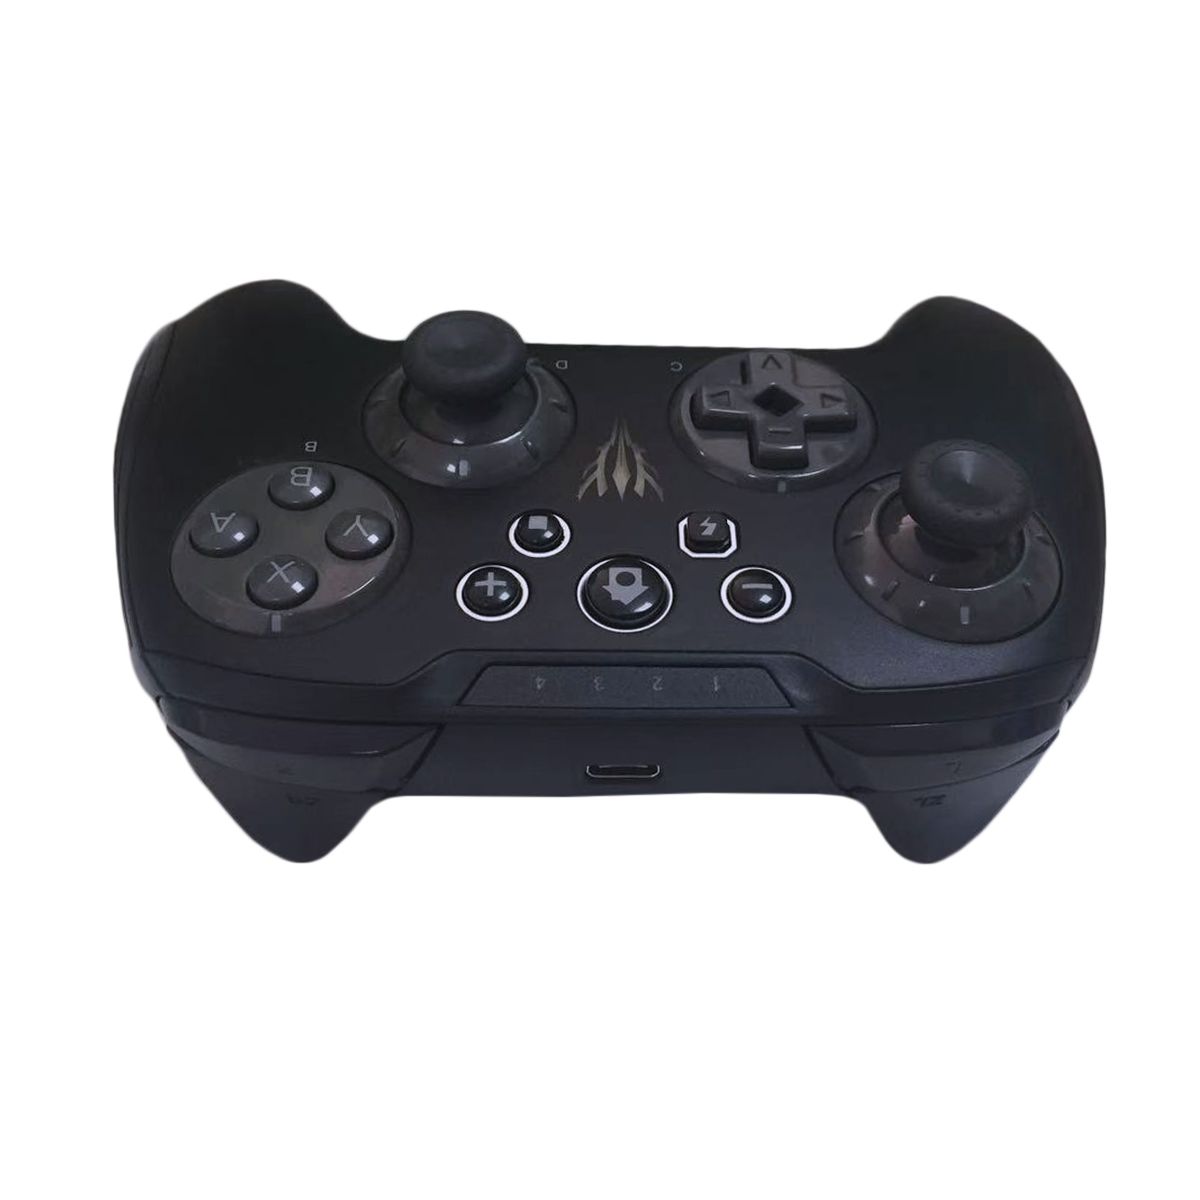 Wireless-Gamepad-Vibration-Game-Controller-for-Nintendo-Switch-for-Playstation-PC-Android-Mobile-Pho-1646891